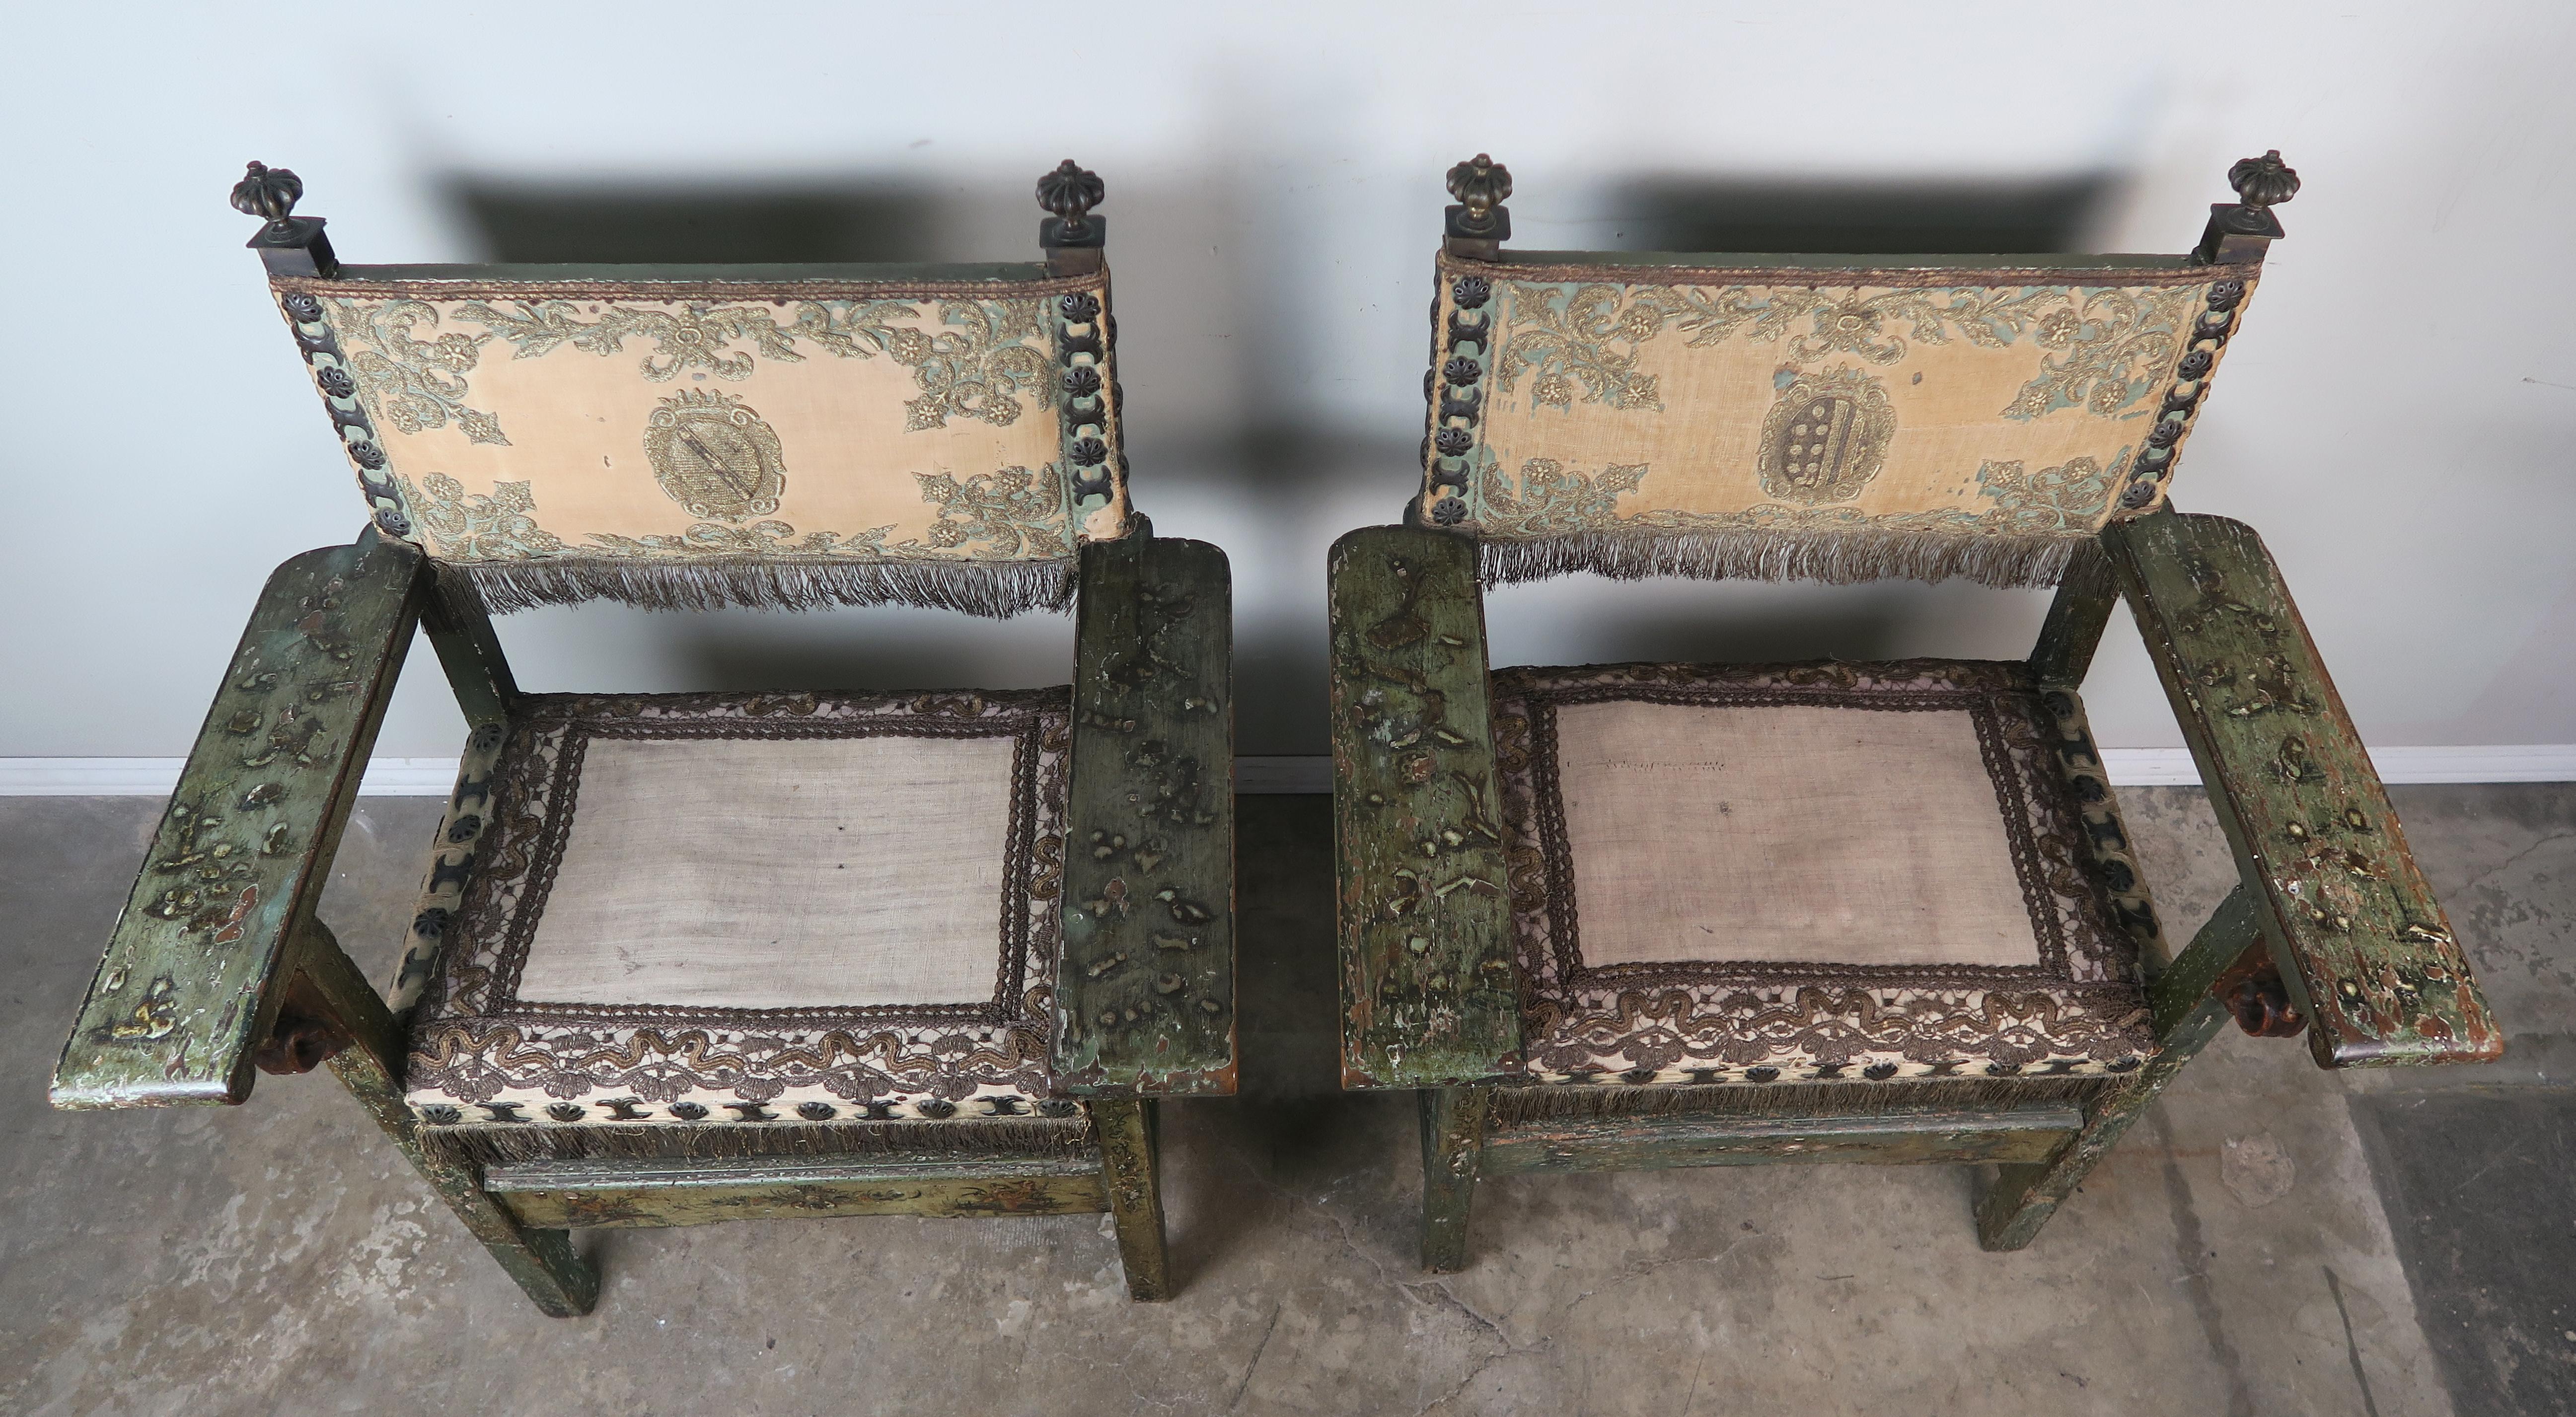 Hand-Painted 18th Century Spanish Colonial Painted Armchairs with Metallic Embroidery